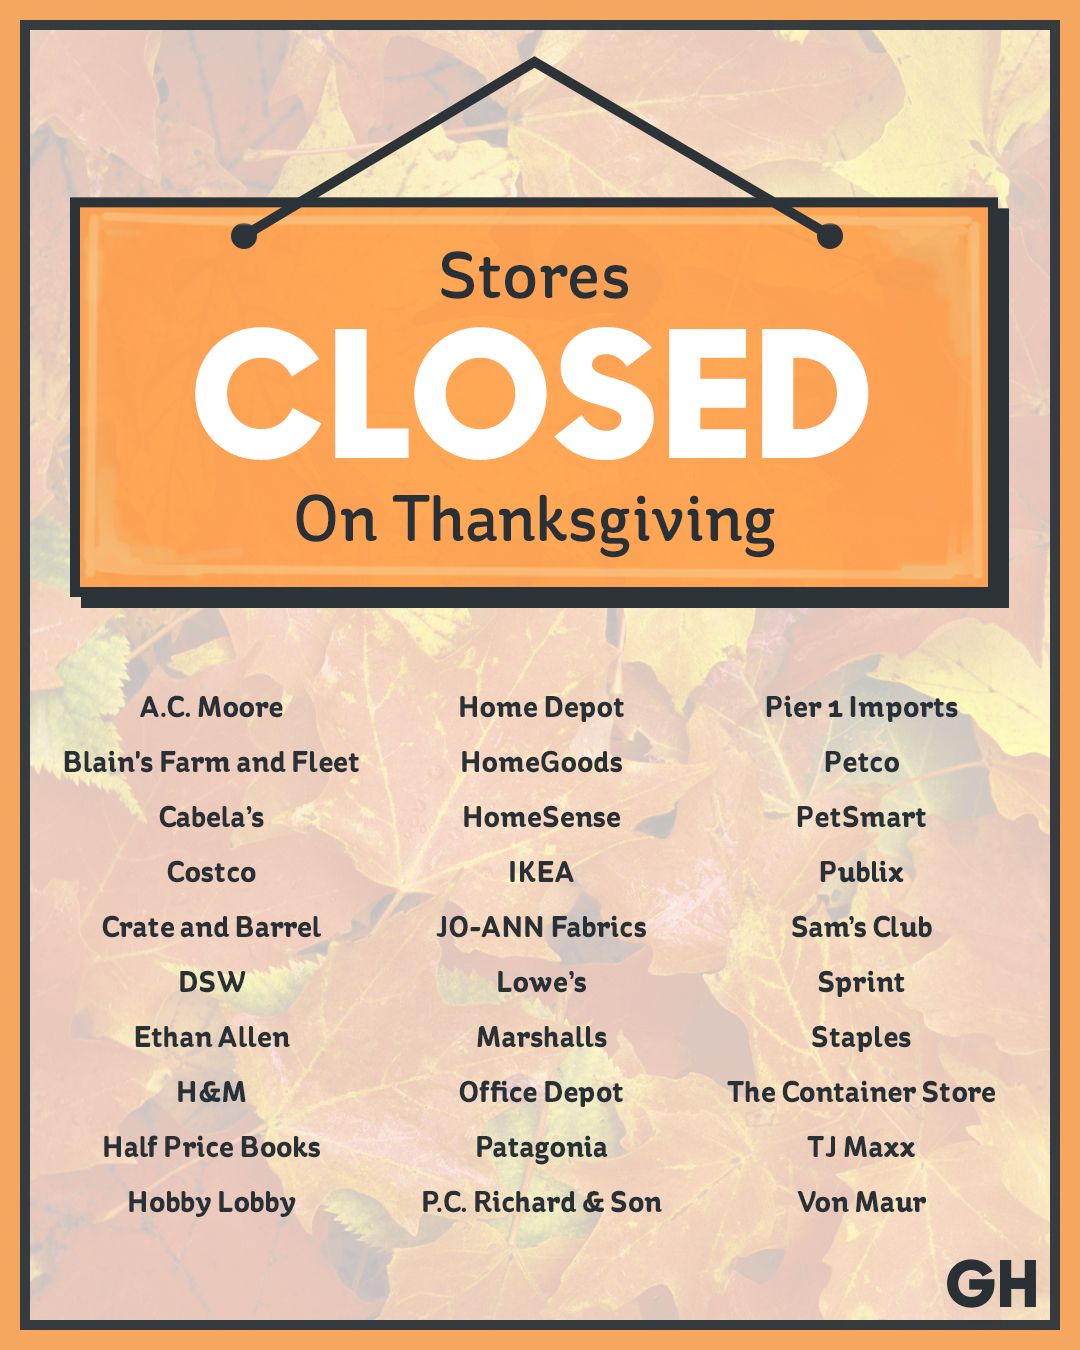 Stores Closed on Thanksgiving Day 2017 List